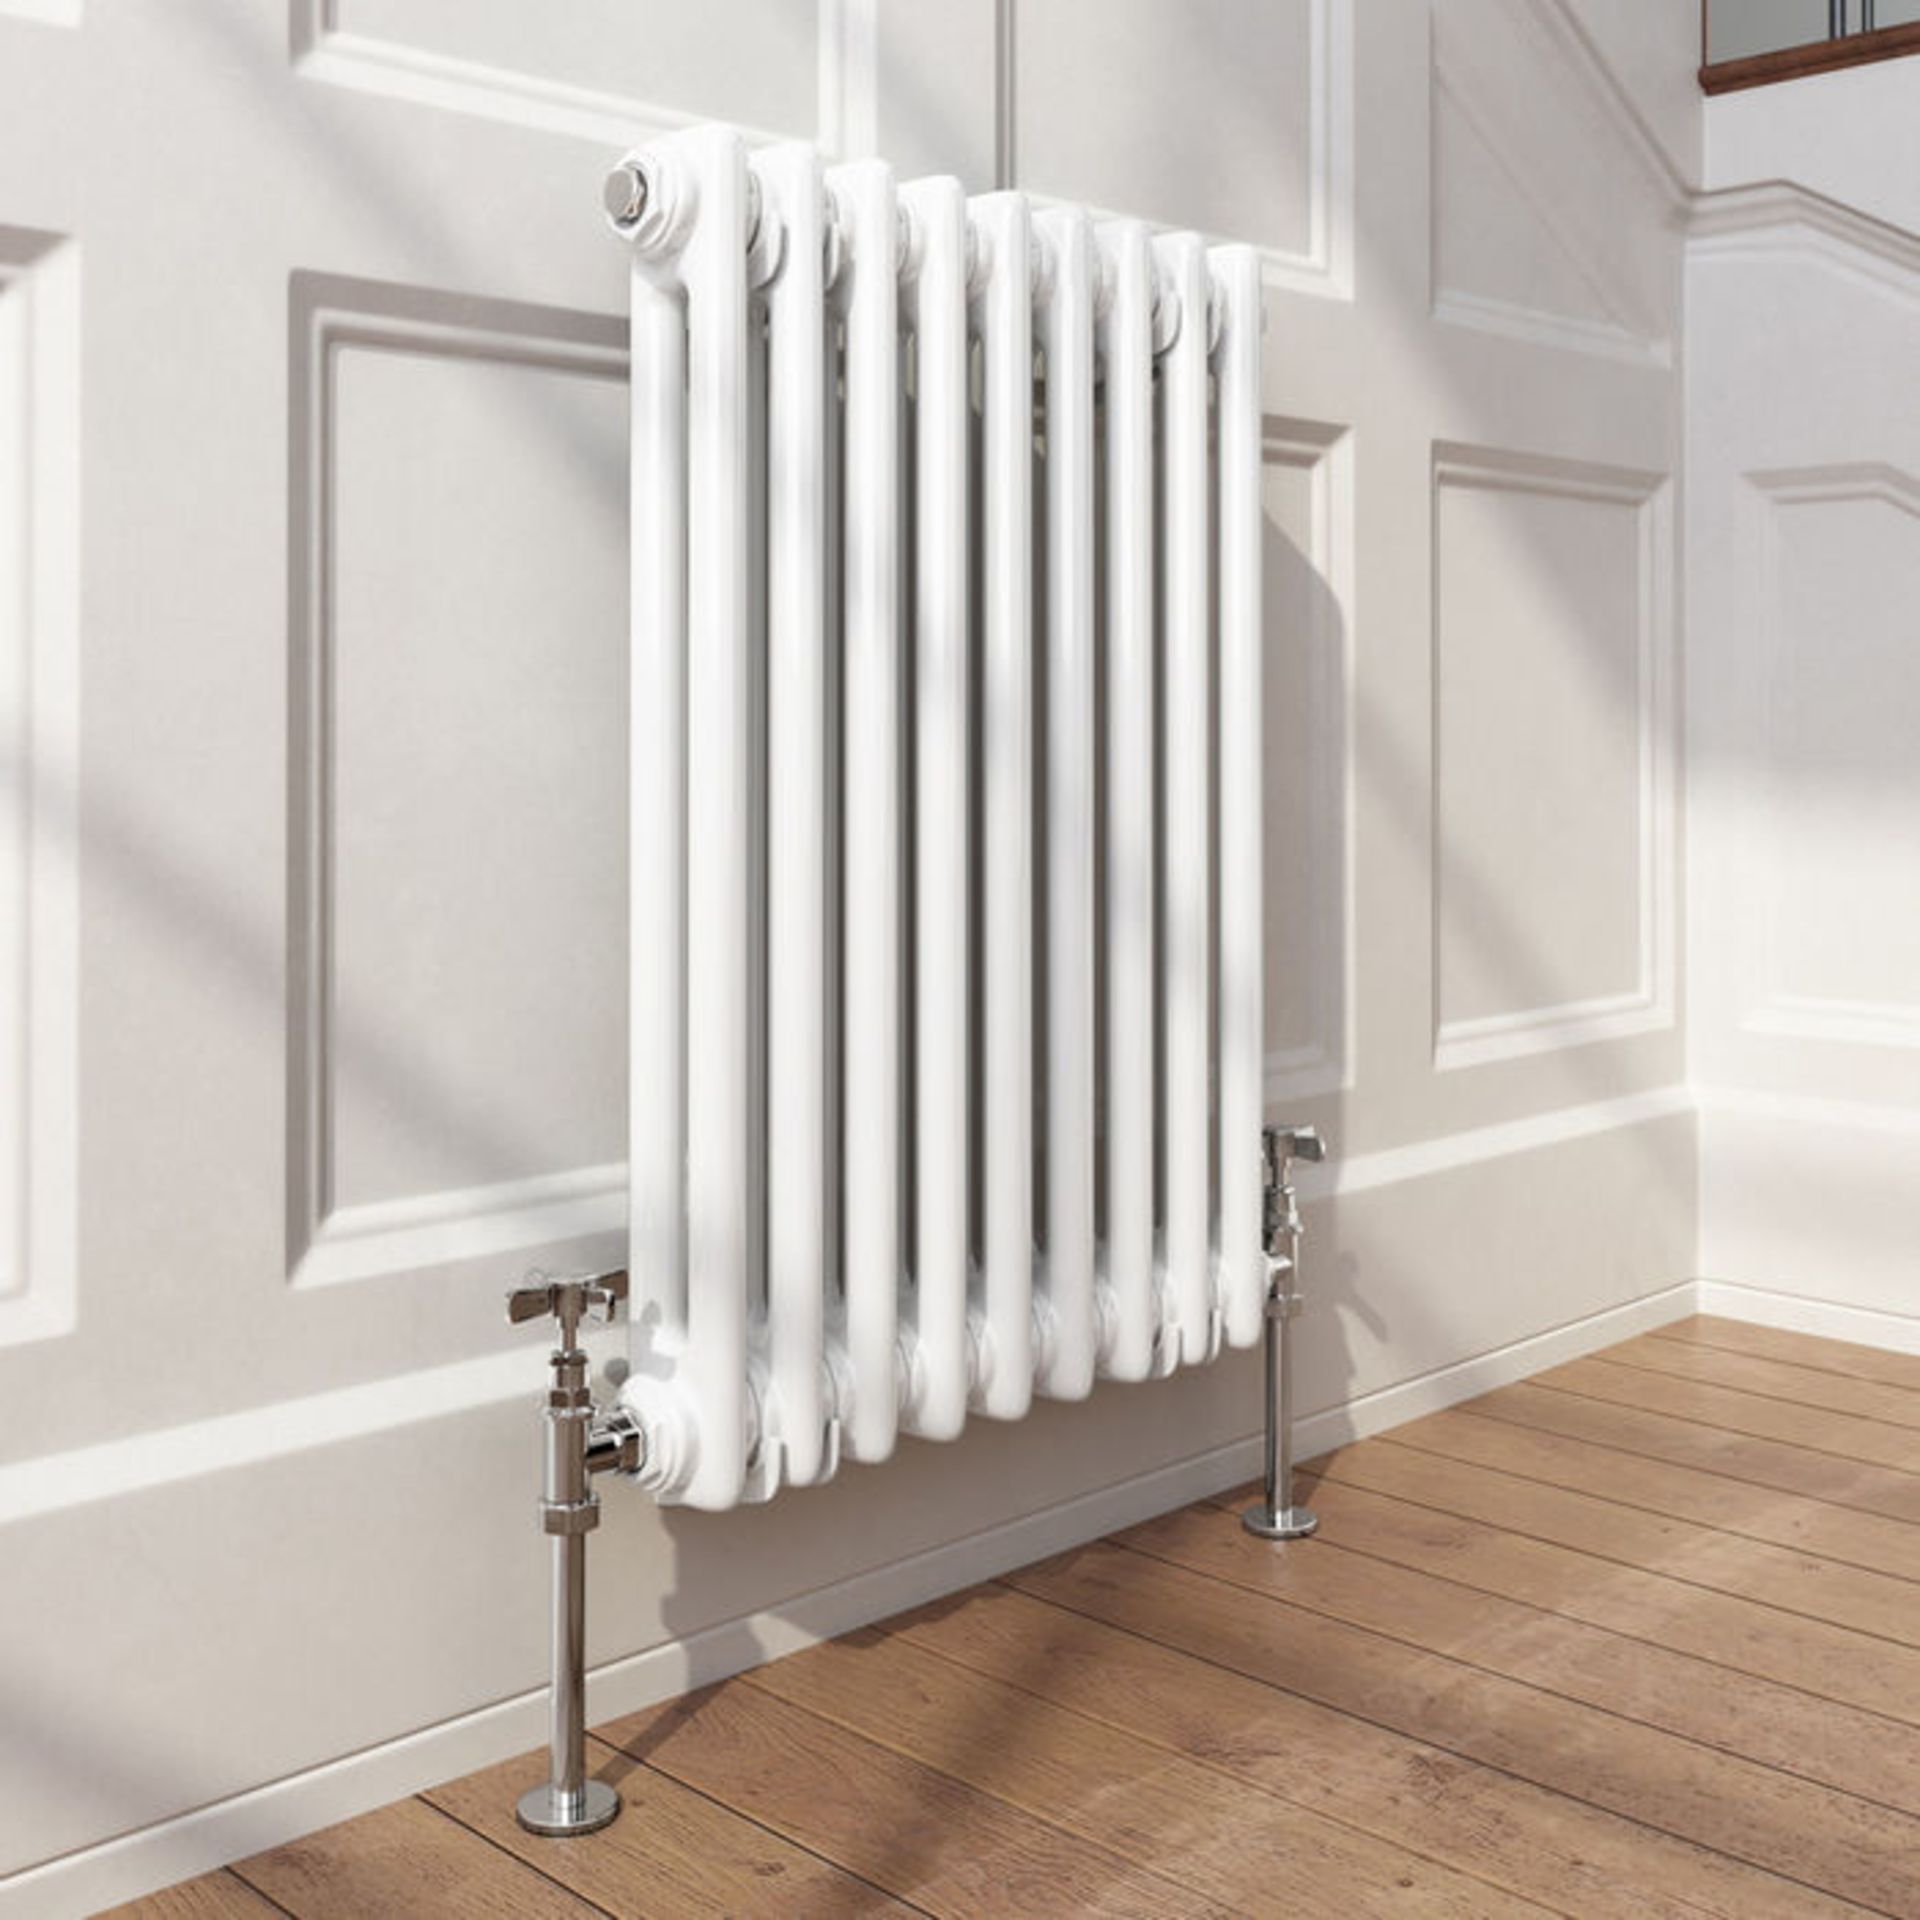 Brand New 600x420mm White Double Panel Horizontal Colosseum Traditional Radiator. RRP £199.99. RC577 - Image 3 of 3